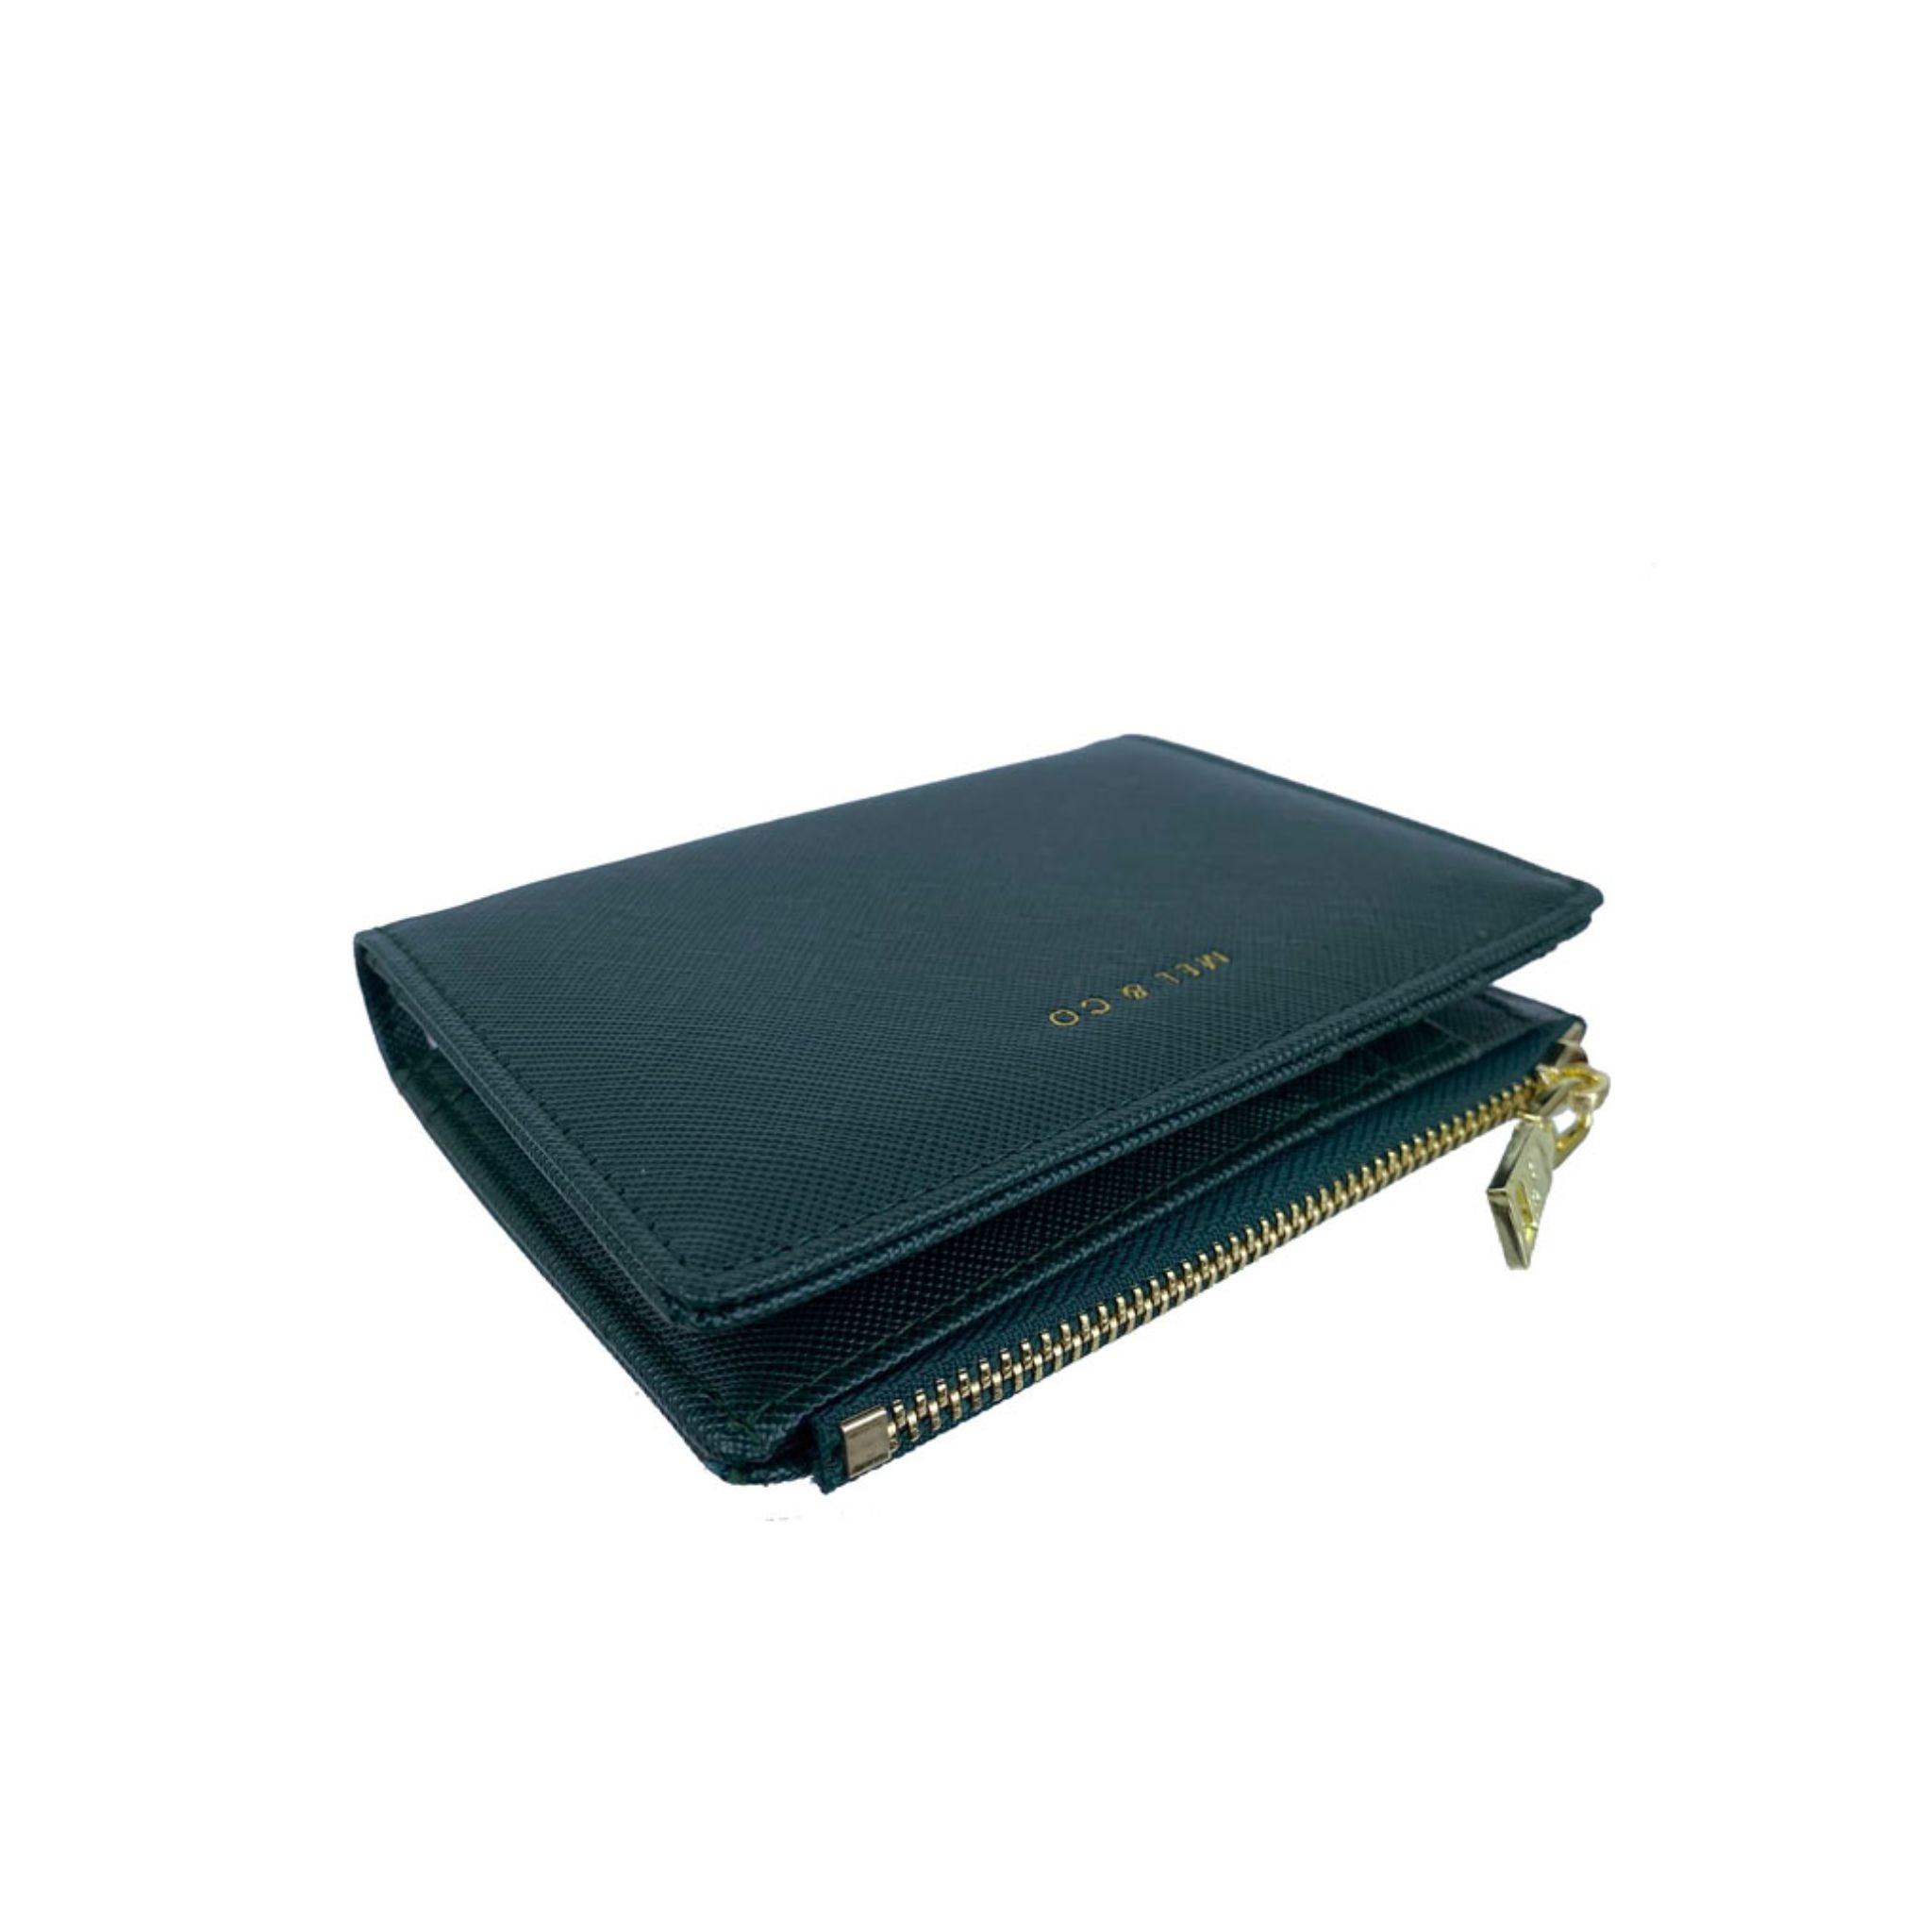 Mel&Co Saffiano-Effect Bifold Compact Snap Wallet Forest Green